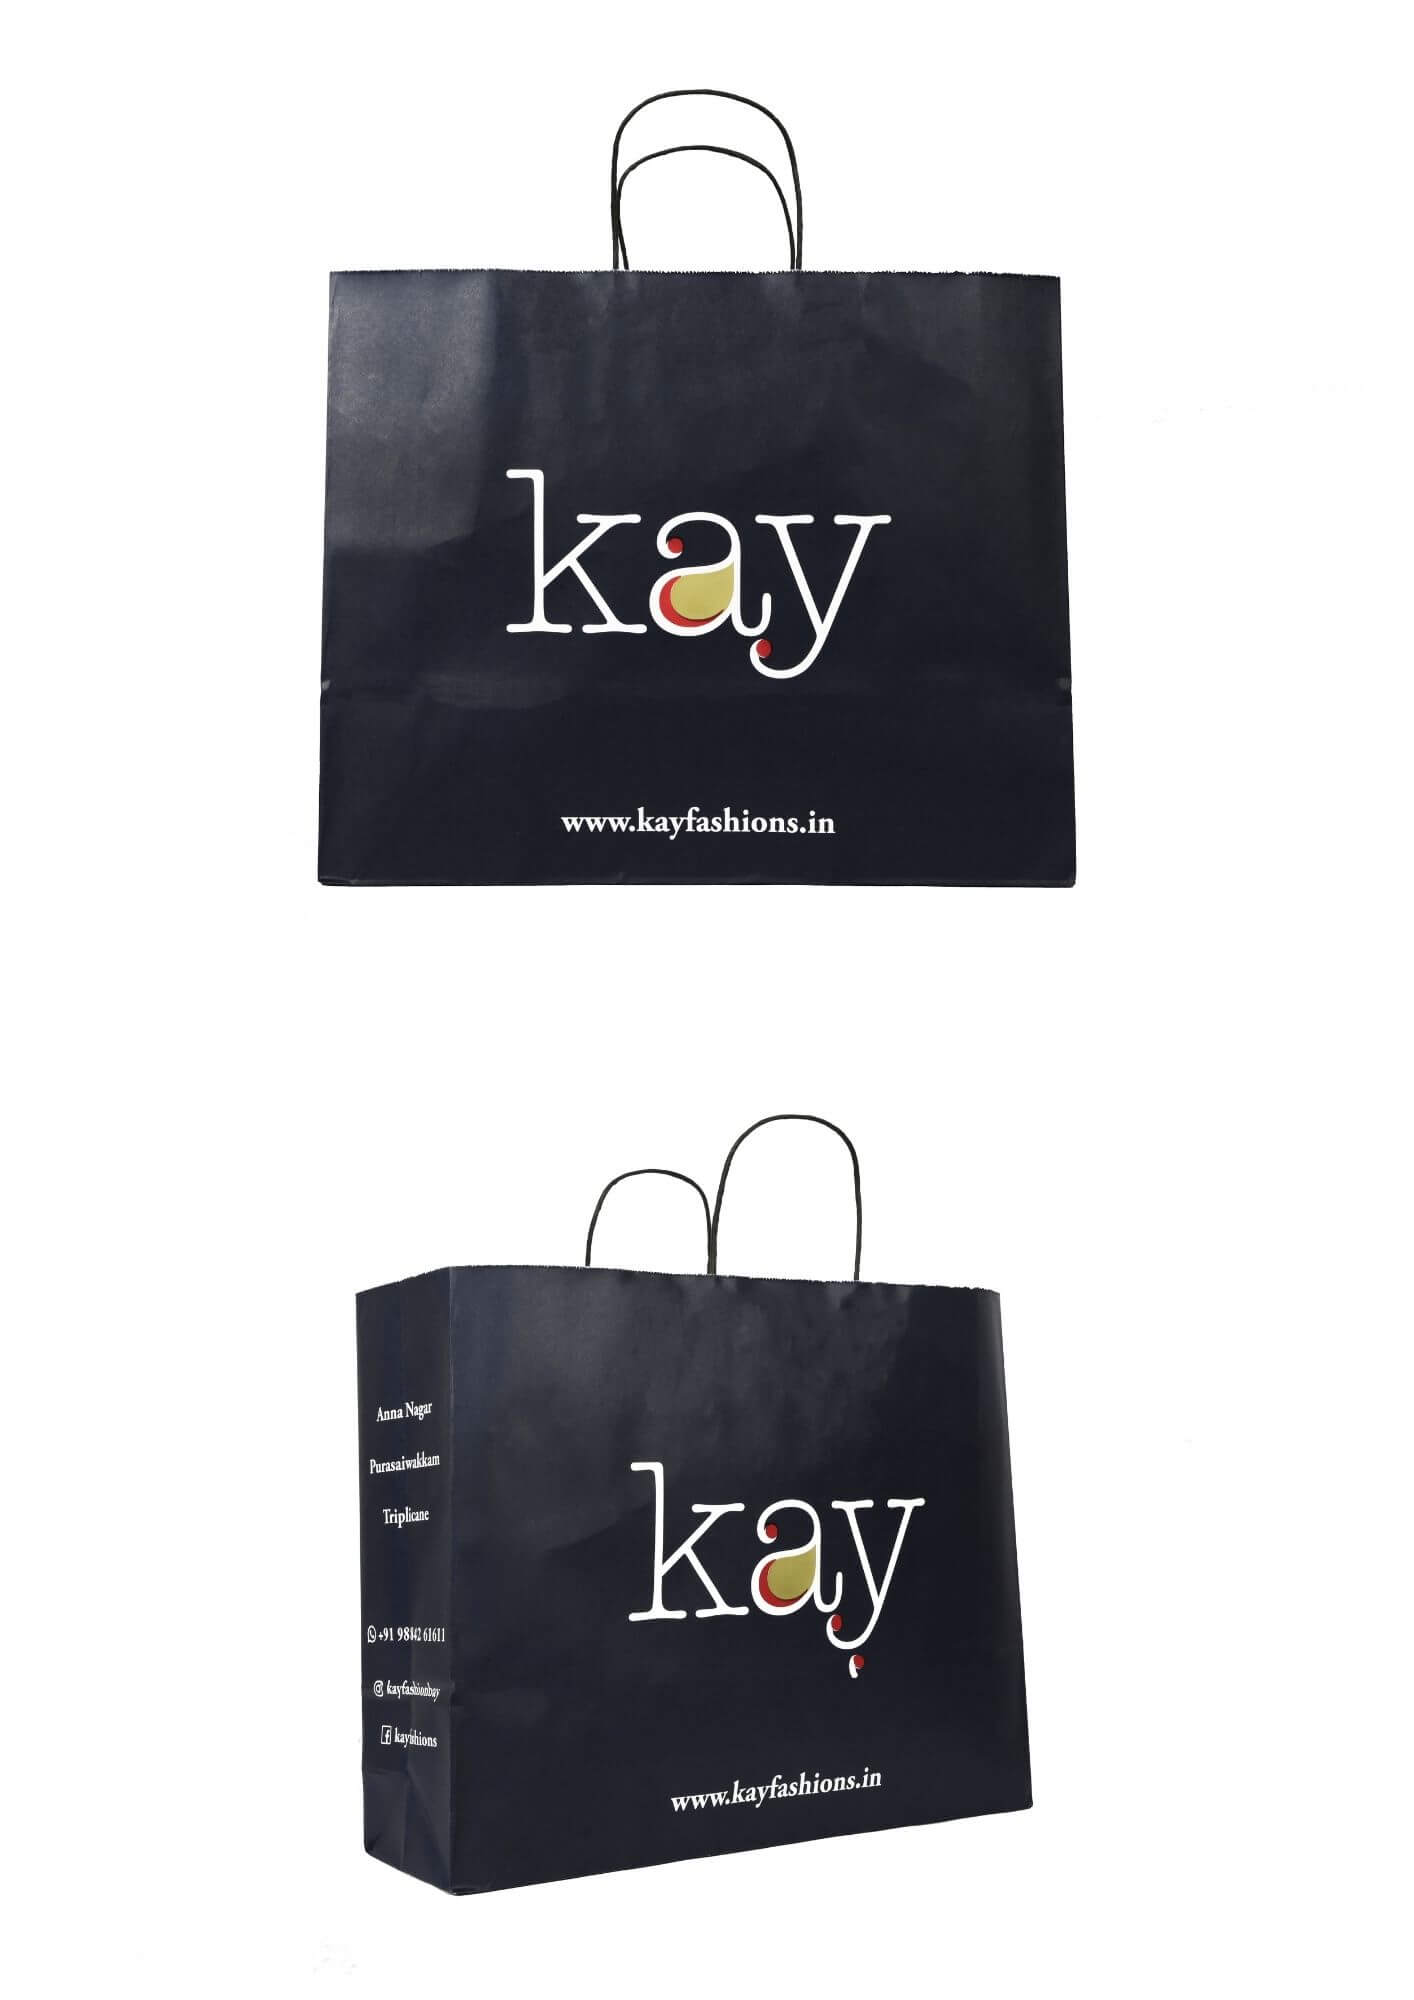 A bleach kraft paper bag printed by max packaging for kay